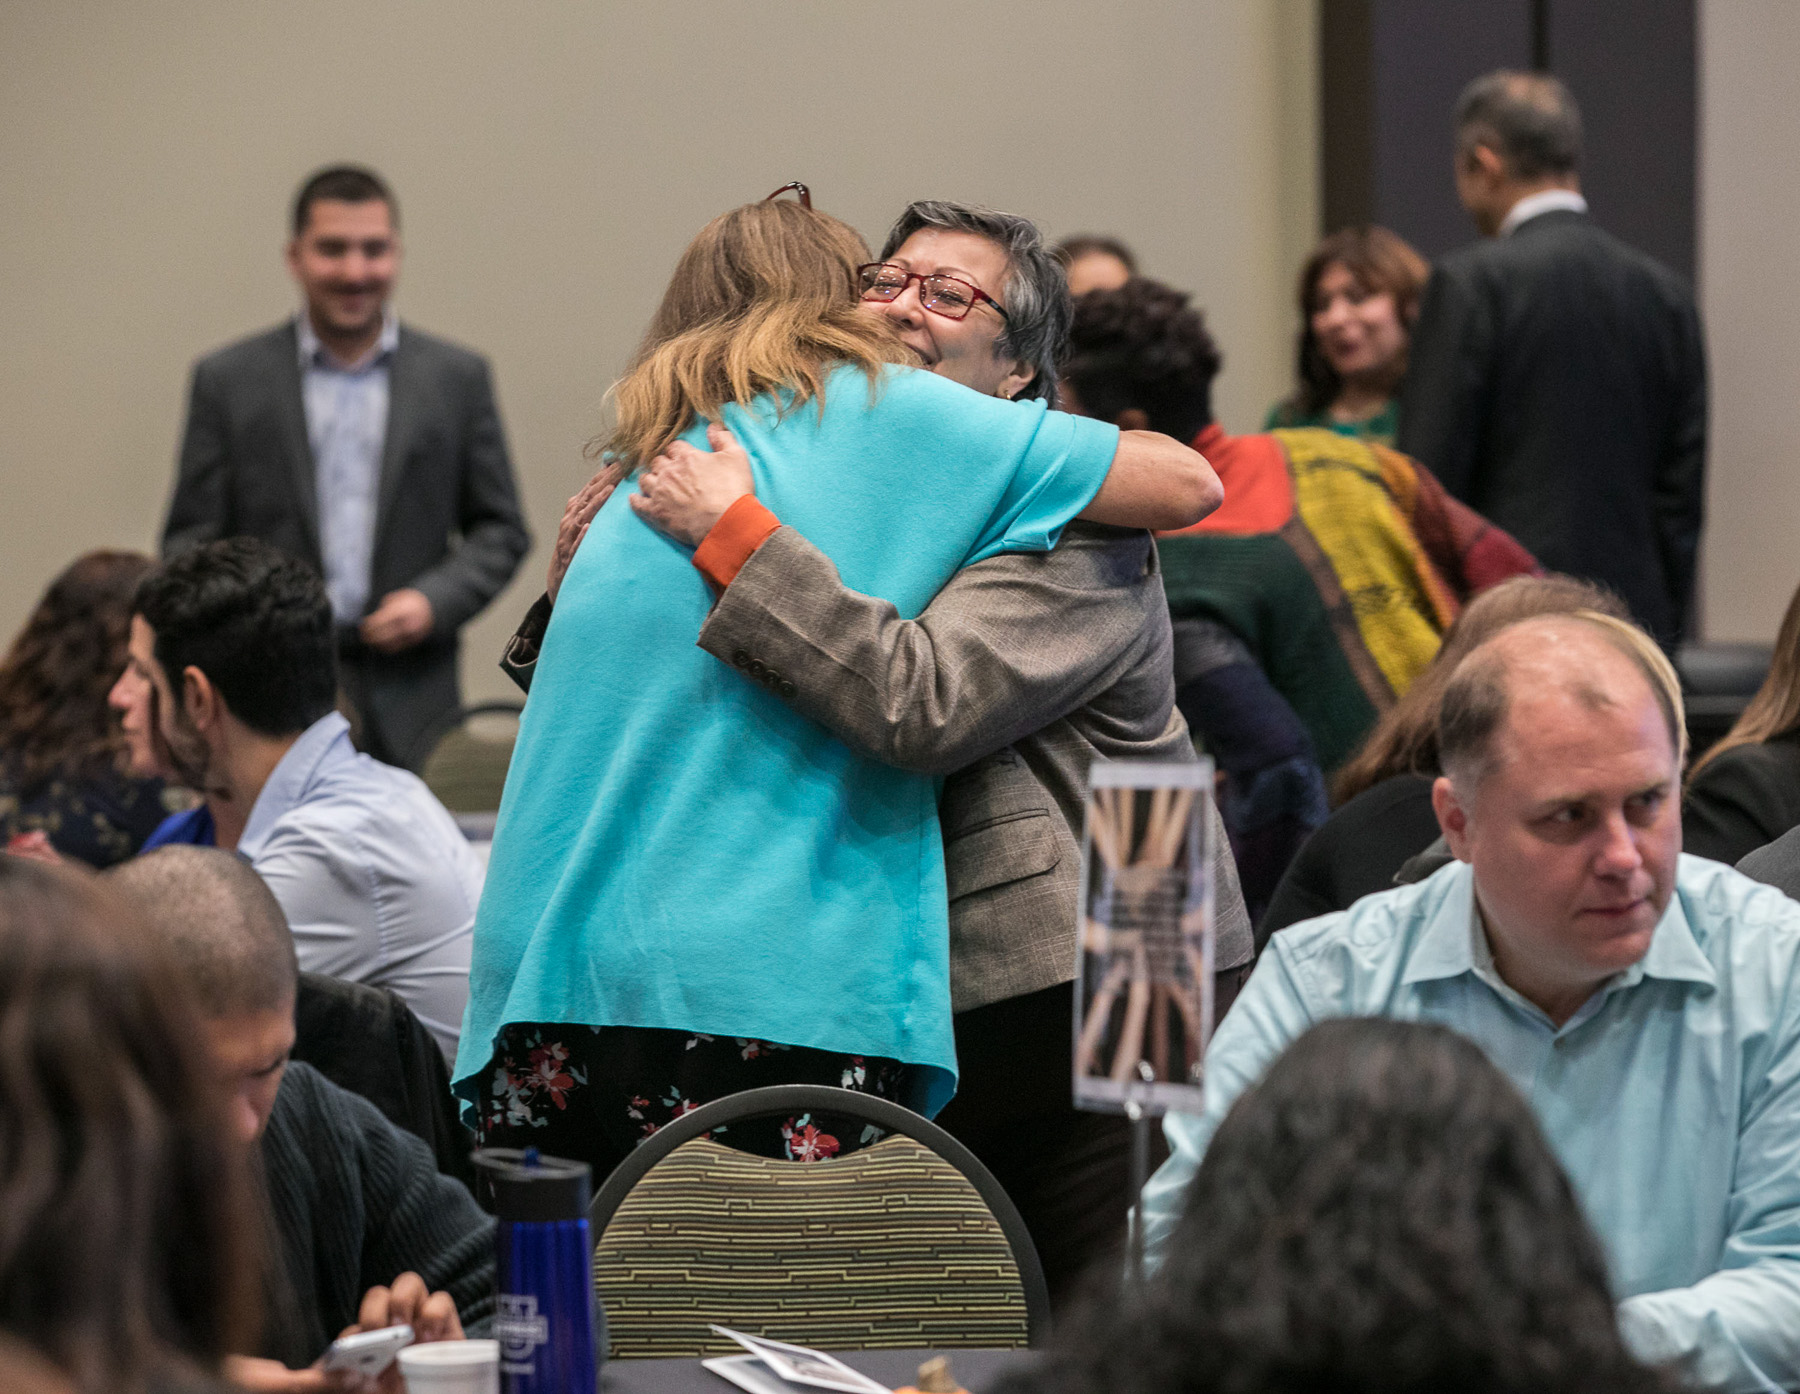 Members of the DePaul community reunite with friends as they gather for the annual Dolores Huerta Prayer Breakfast honoring the Latina activist. (DePaul University/Jamie Moncrief)